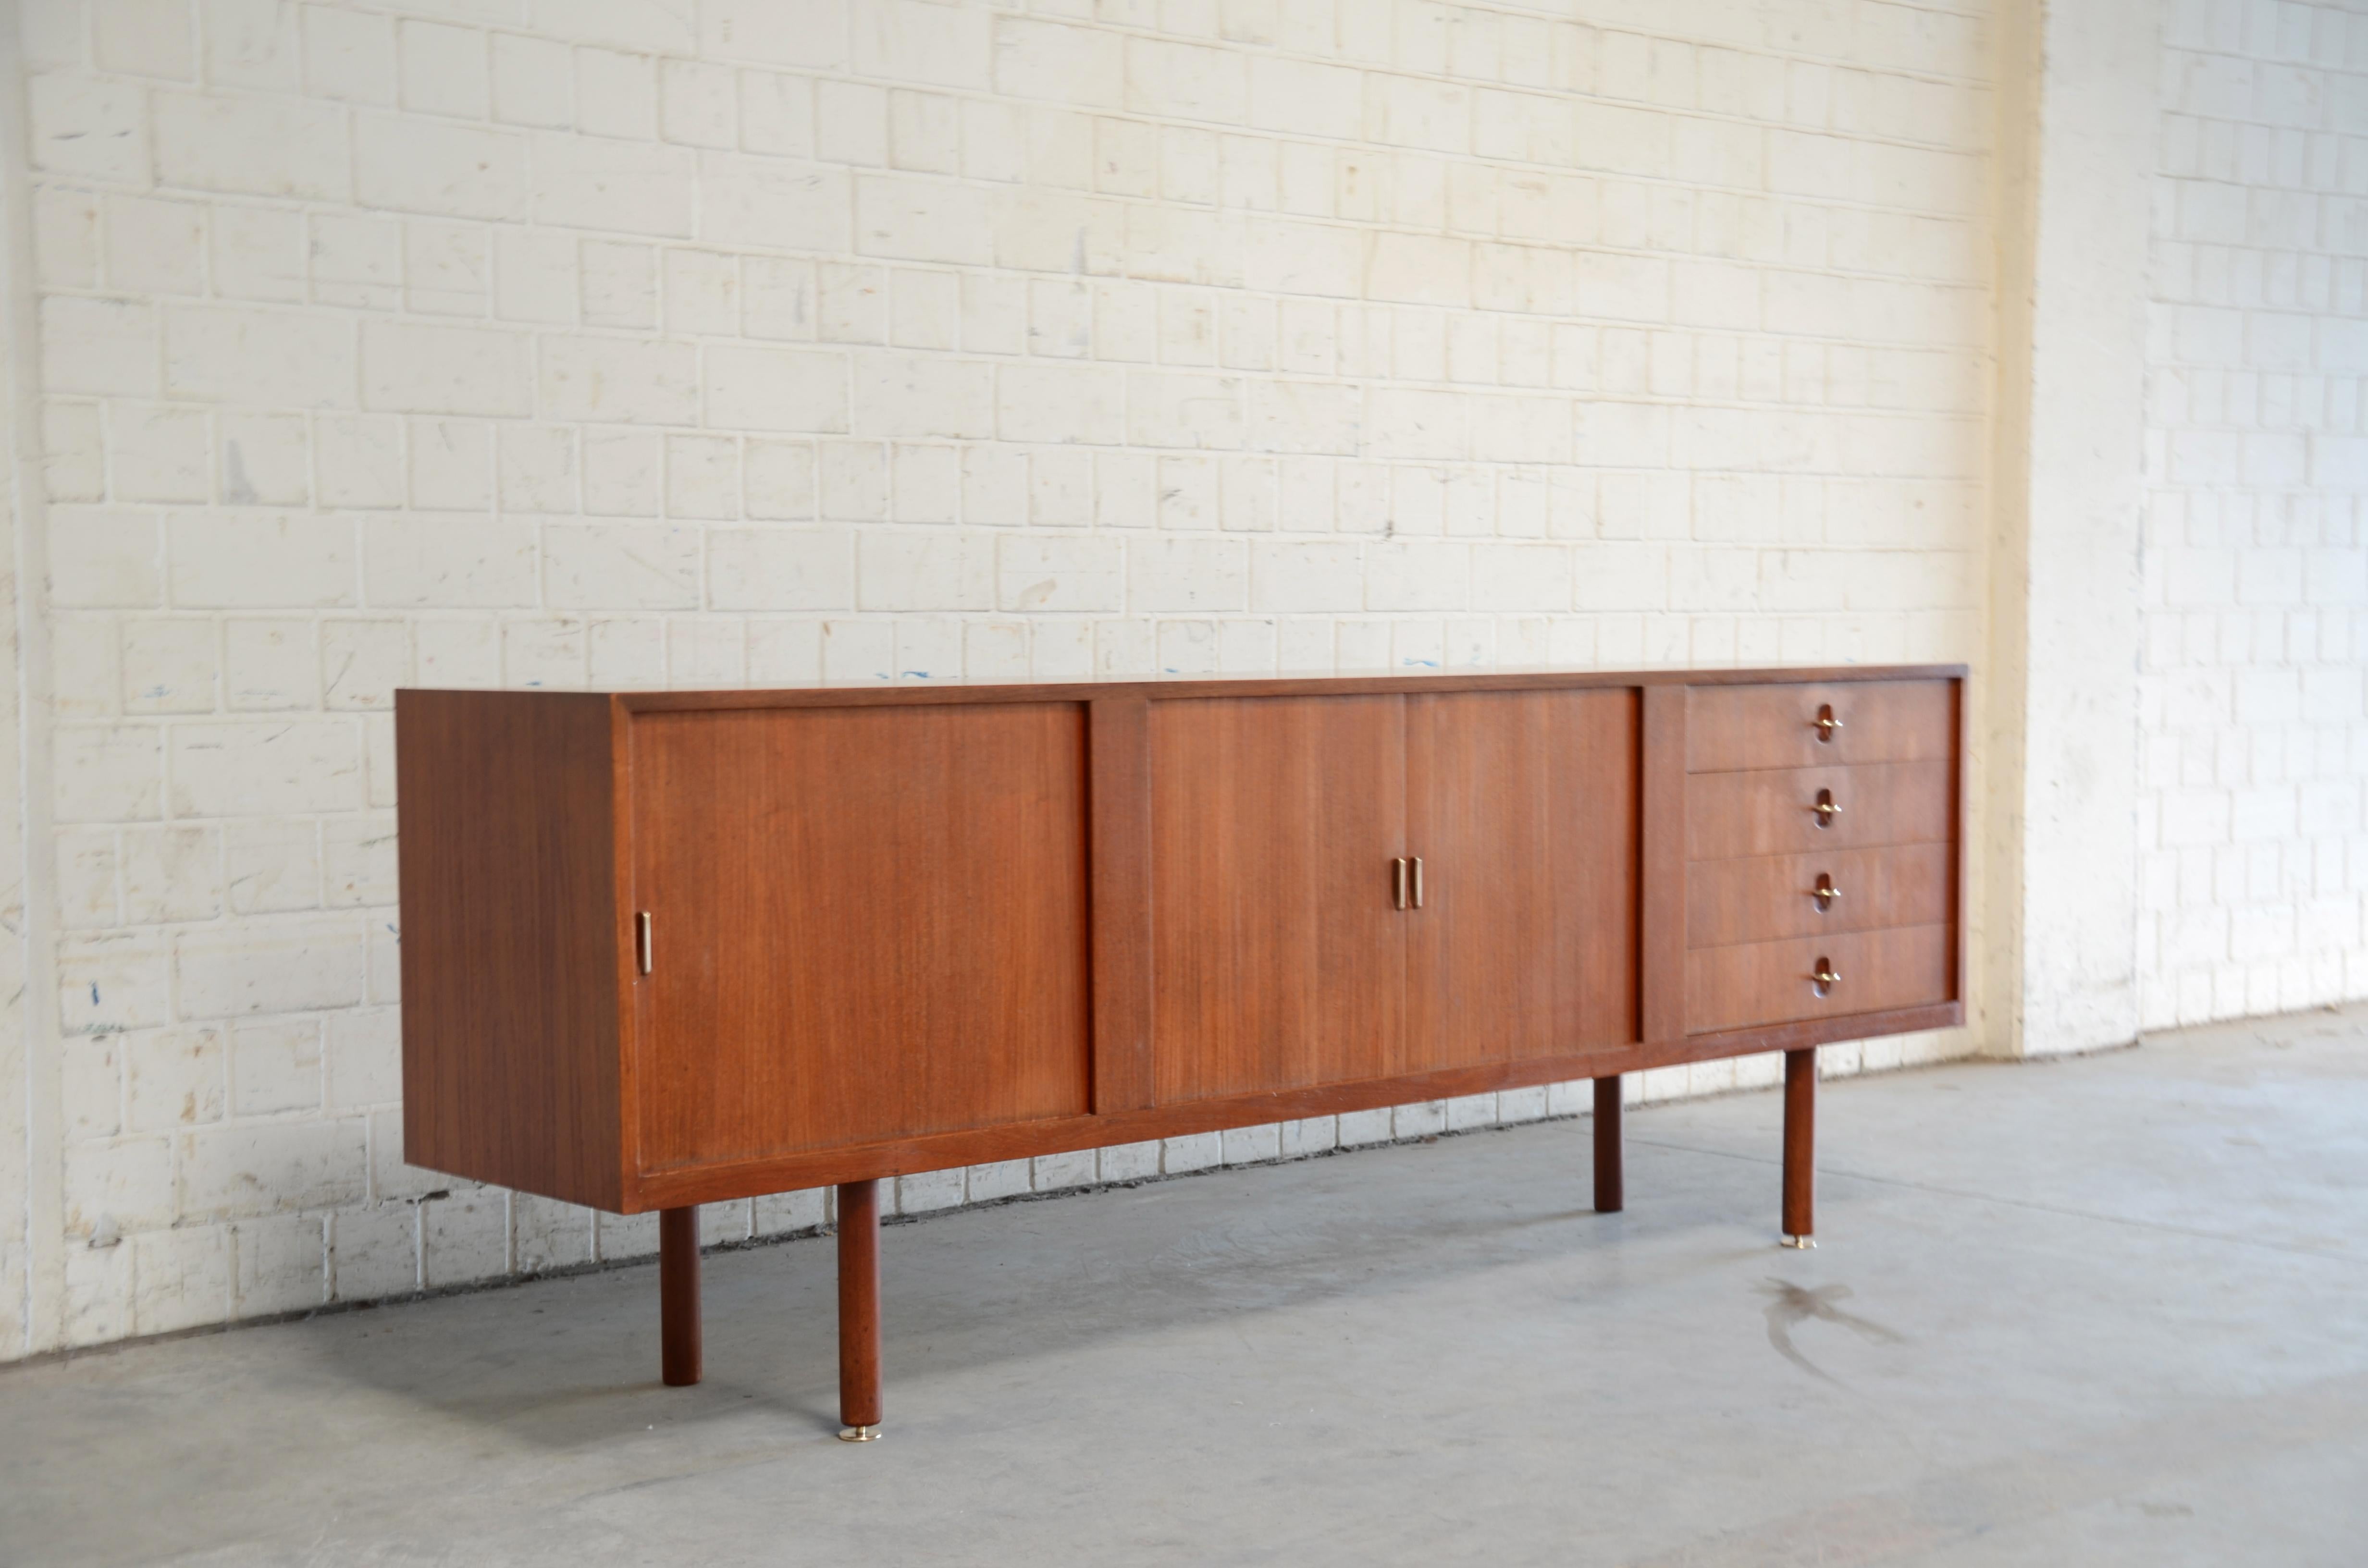 This Danish sideboard is one of the rarest you´ll find on the market.
Designed by Aksel Bender Madsen and Ejner Larsen and produced by Næstved Møbelfabrik in Denmark 1960s. Model NO 1708.
This sideboard is made of teak with simple disappearing